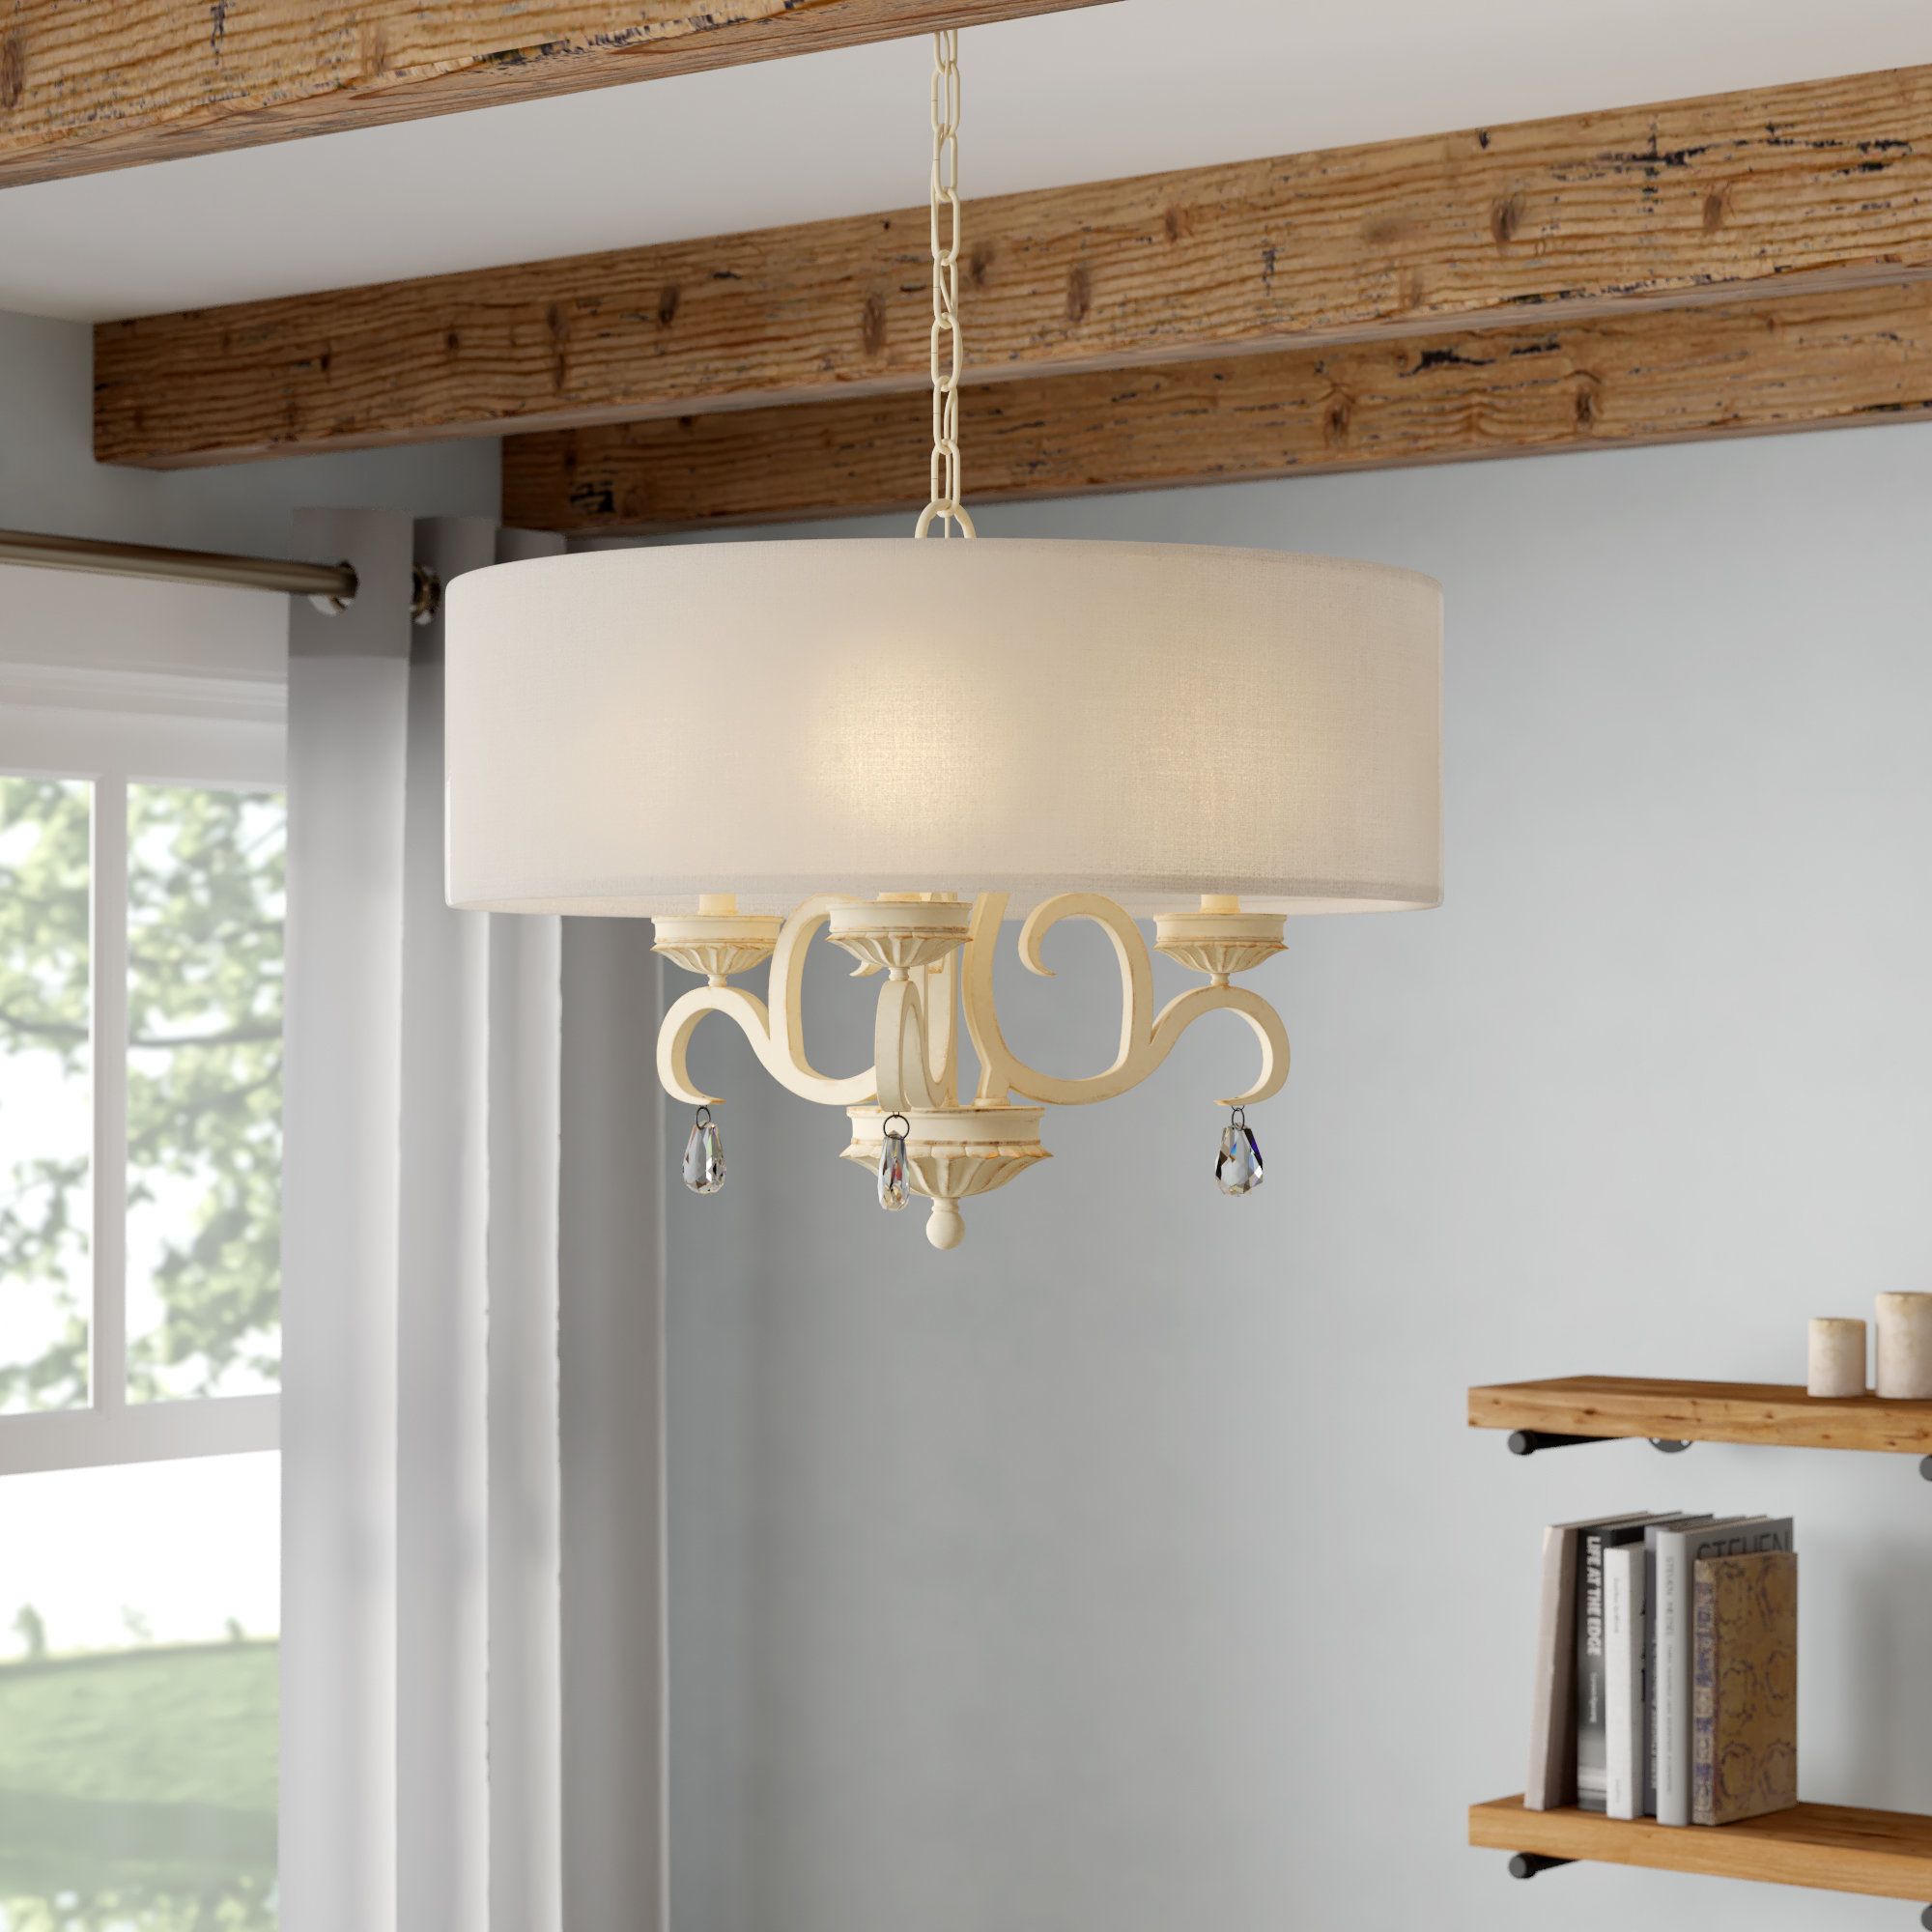 Khaled 3 Light Drum Chandelier Intended For Burton 5 Light Drum Chandeliers (View 24 of 30)